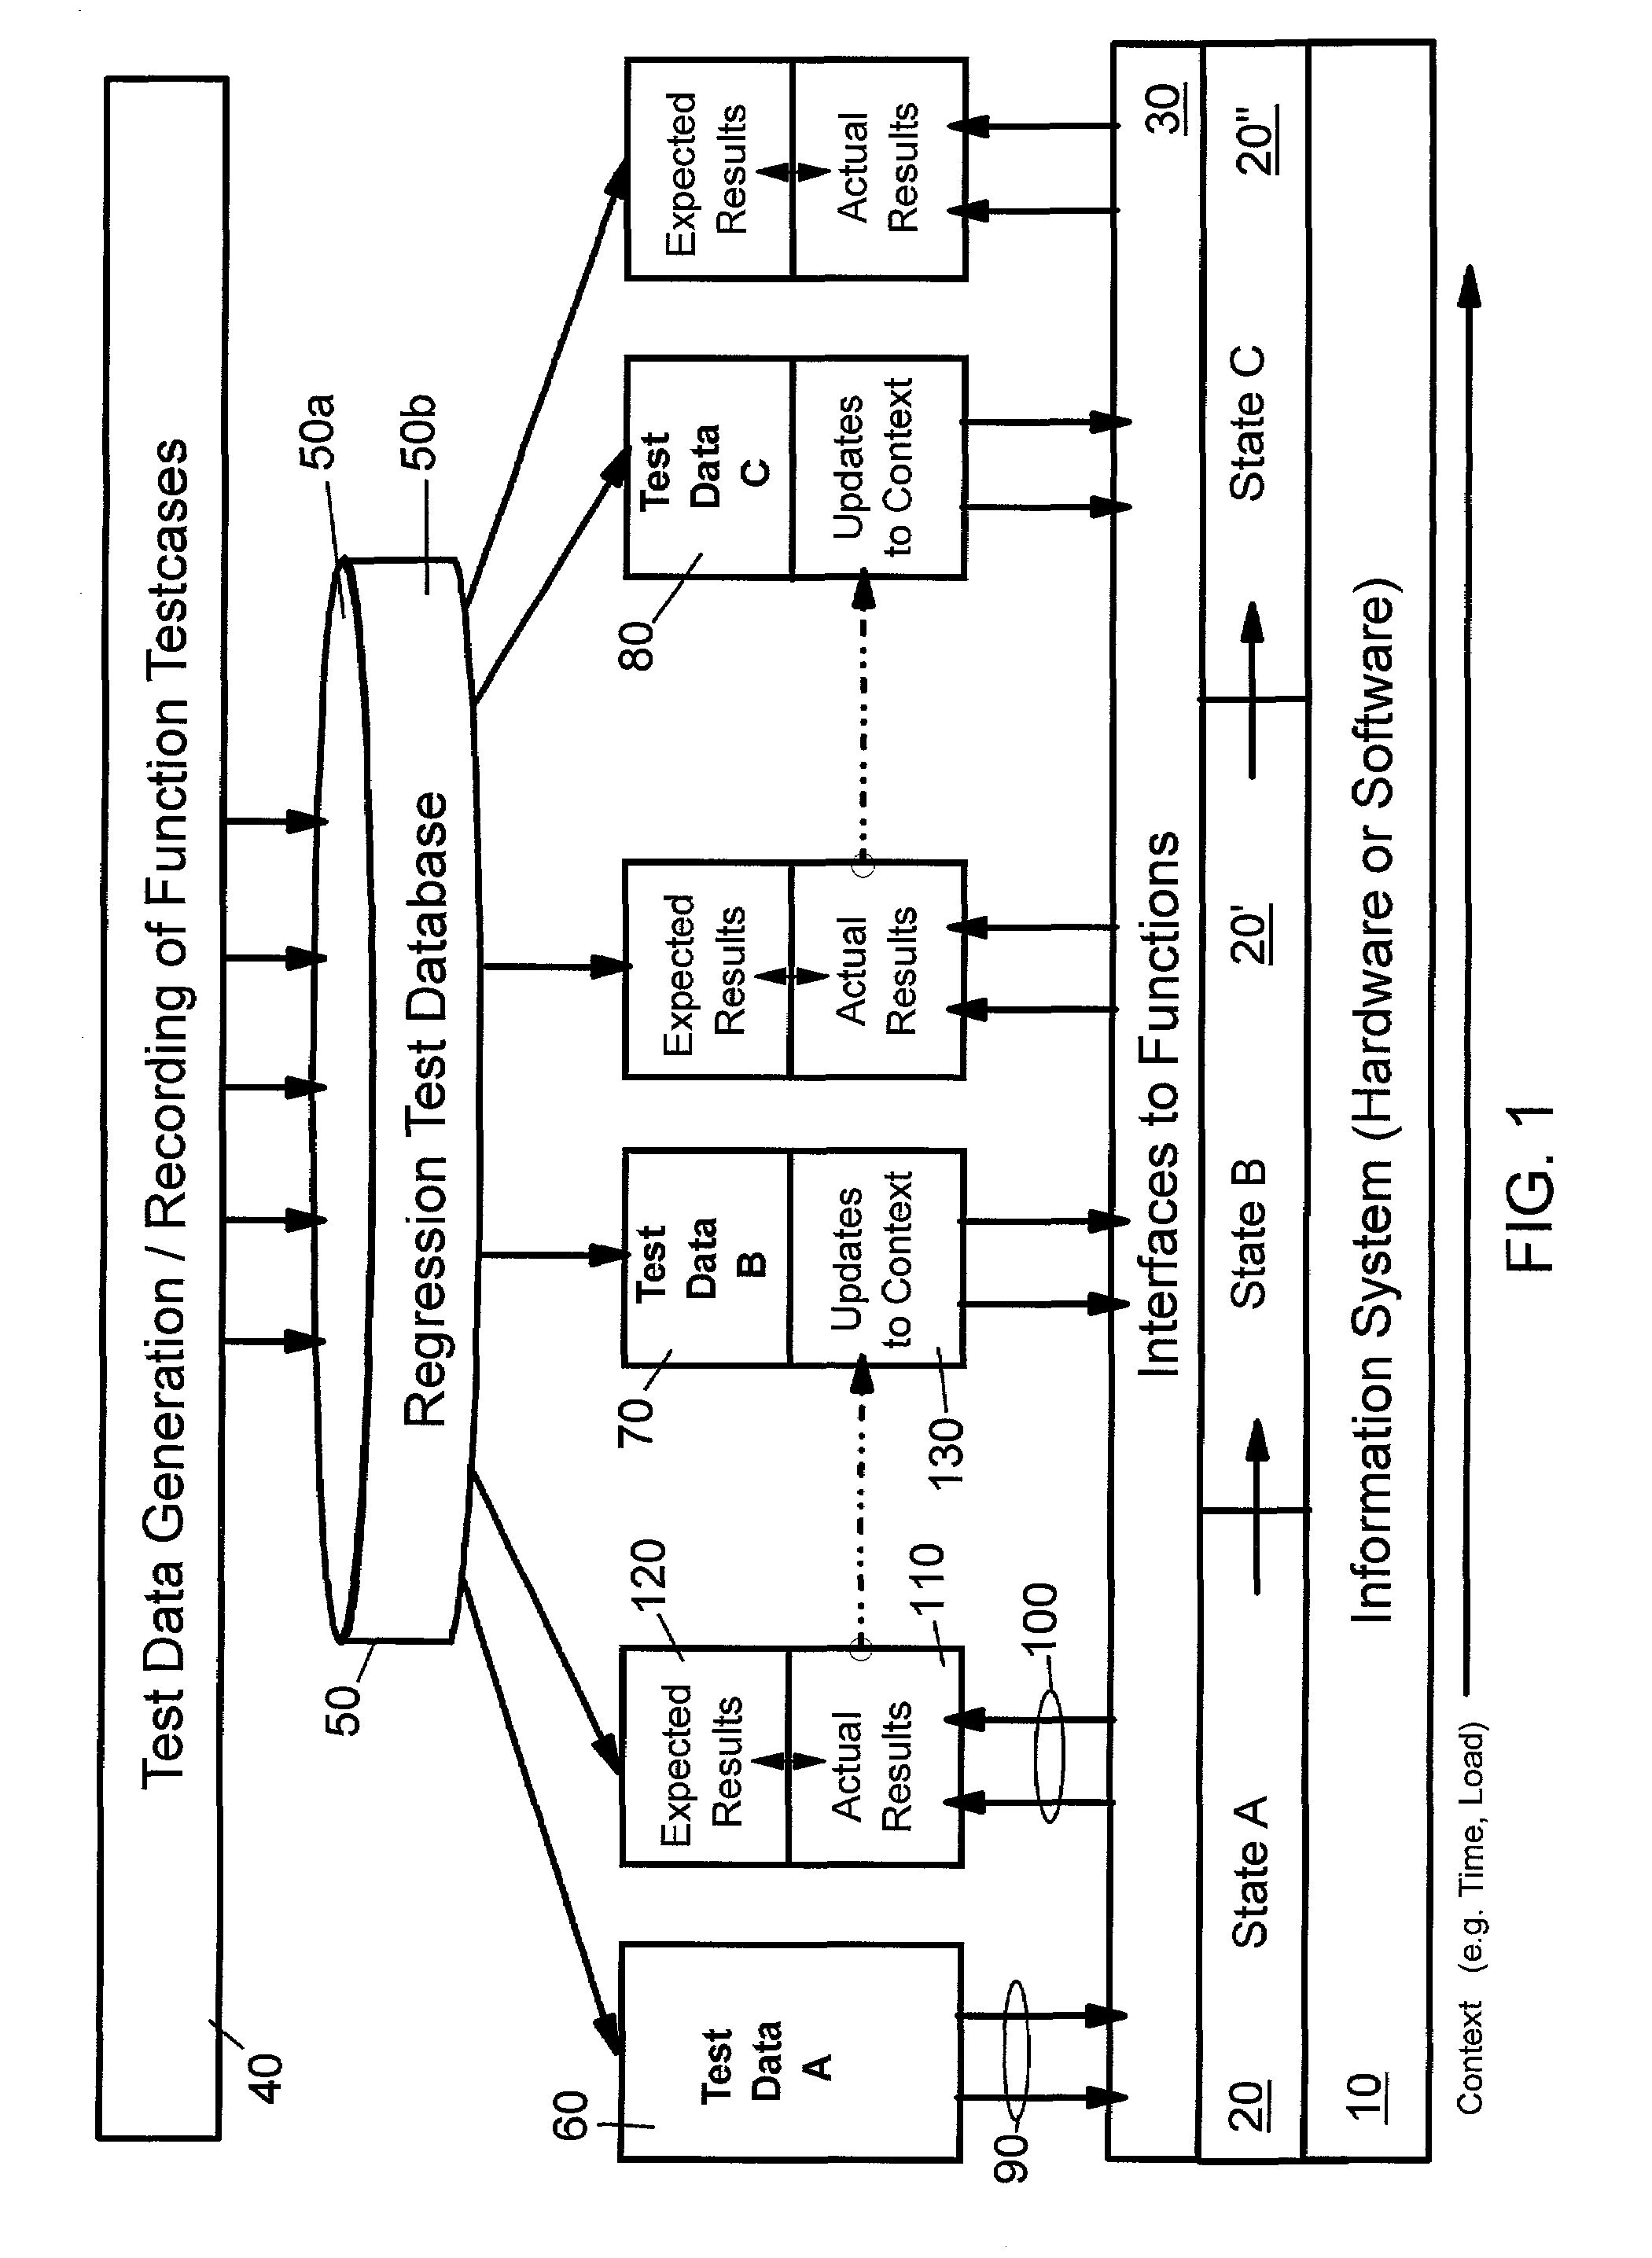 Method and system for performing automated regression tests in a state-dependent data processing system